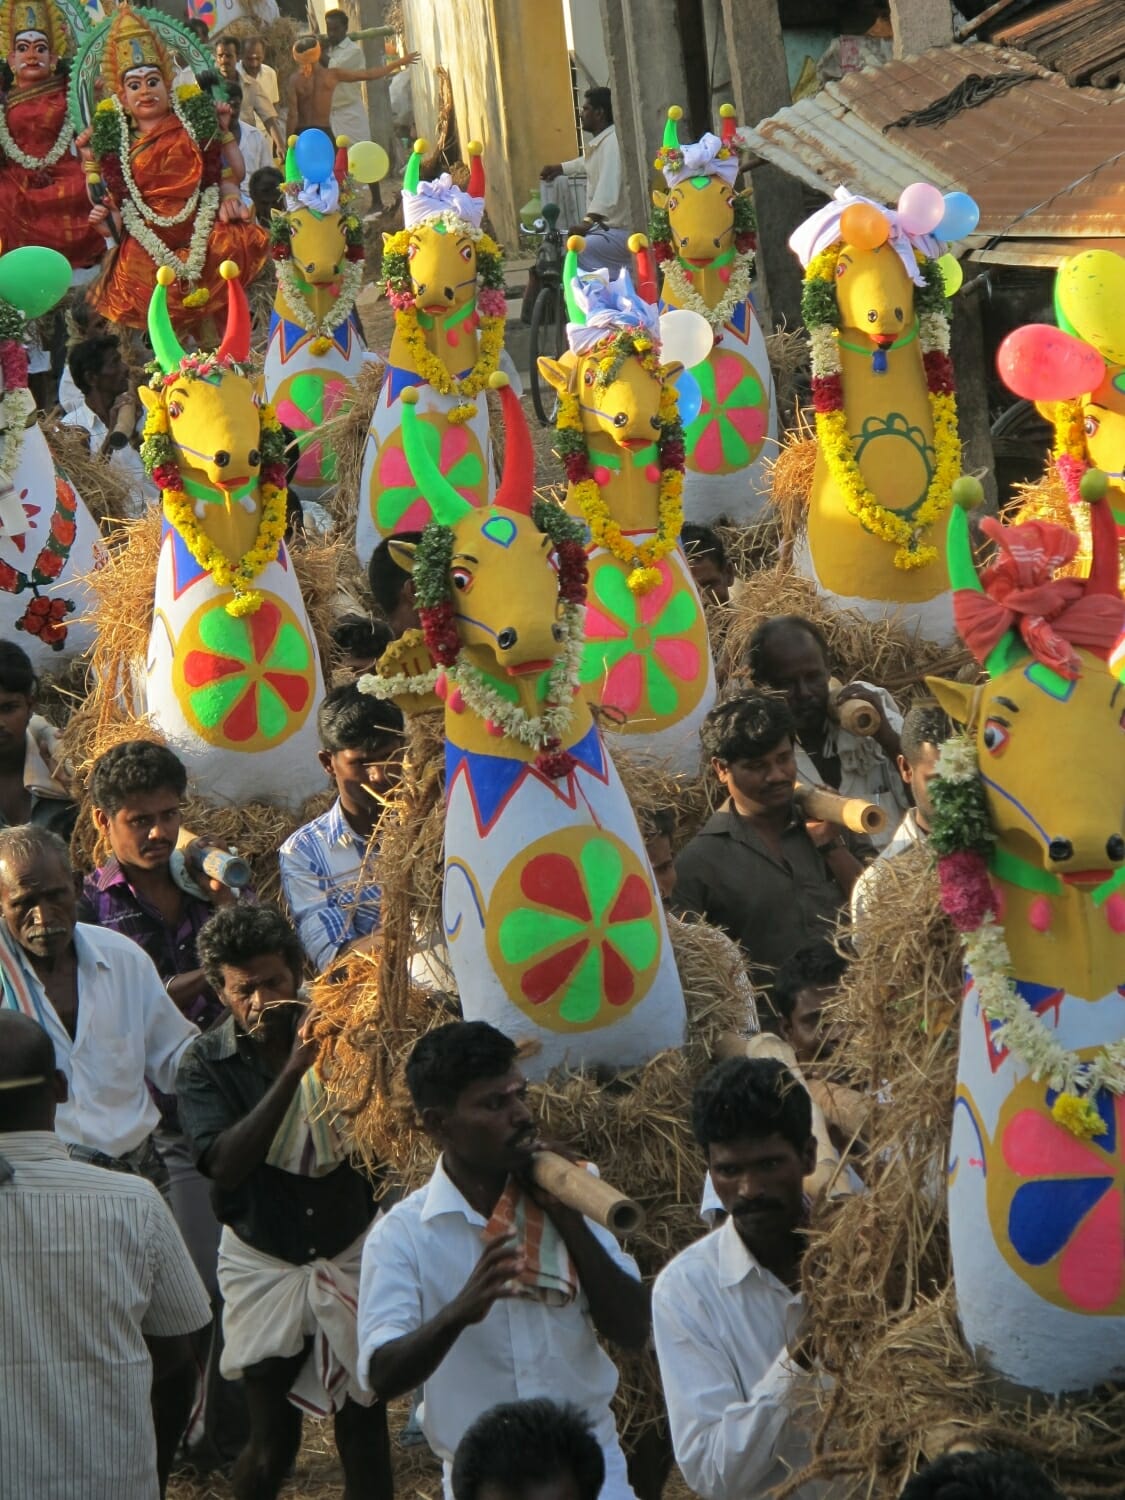 <span style="font-weight:normal;">Devotees leaving the potters' village carrying offerings on their shoulders.</span>